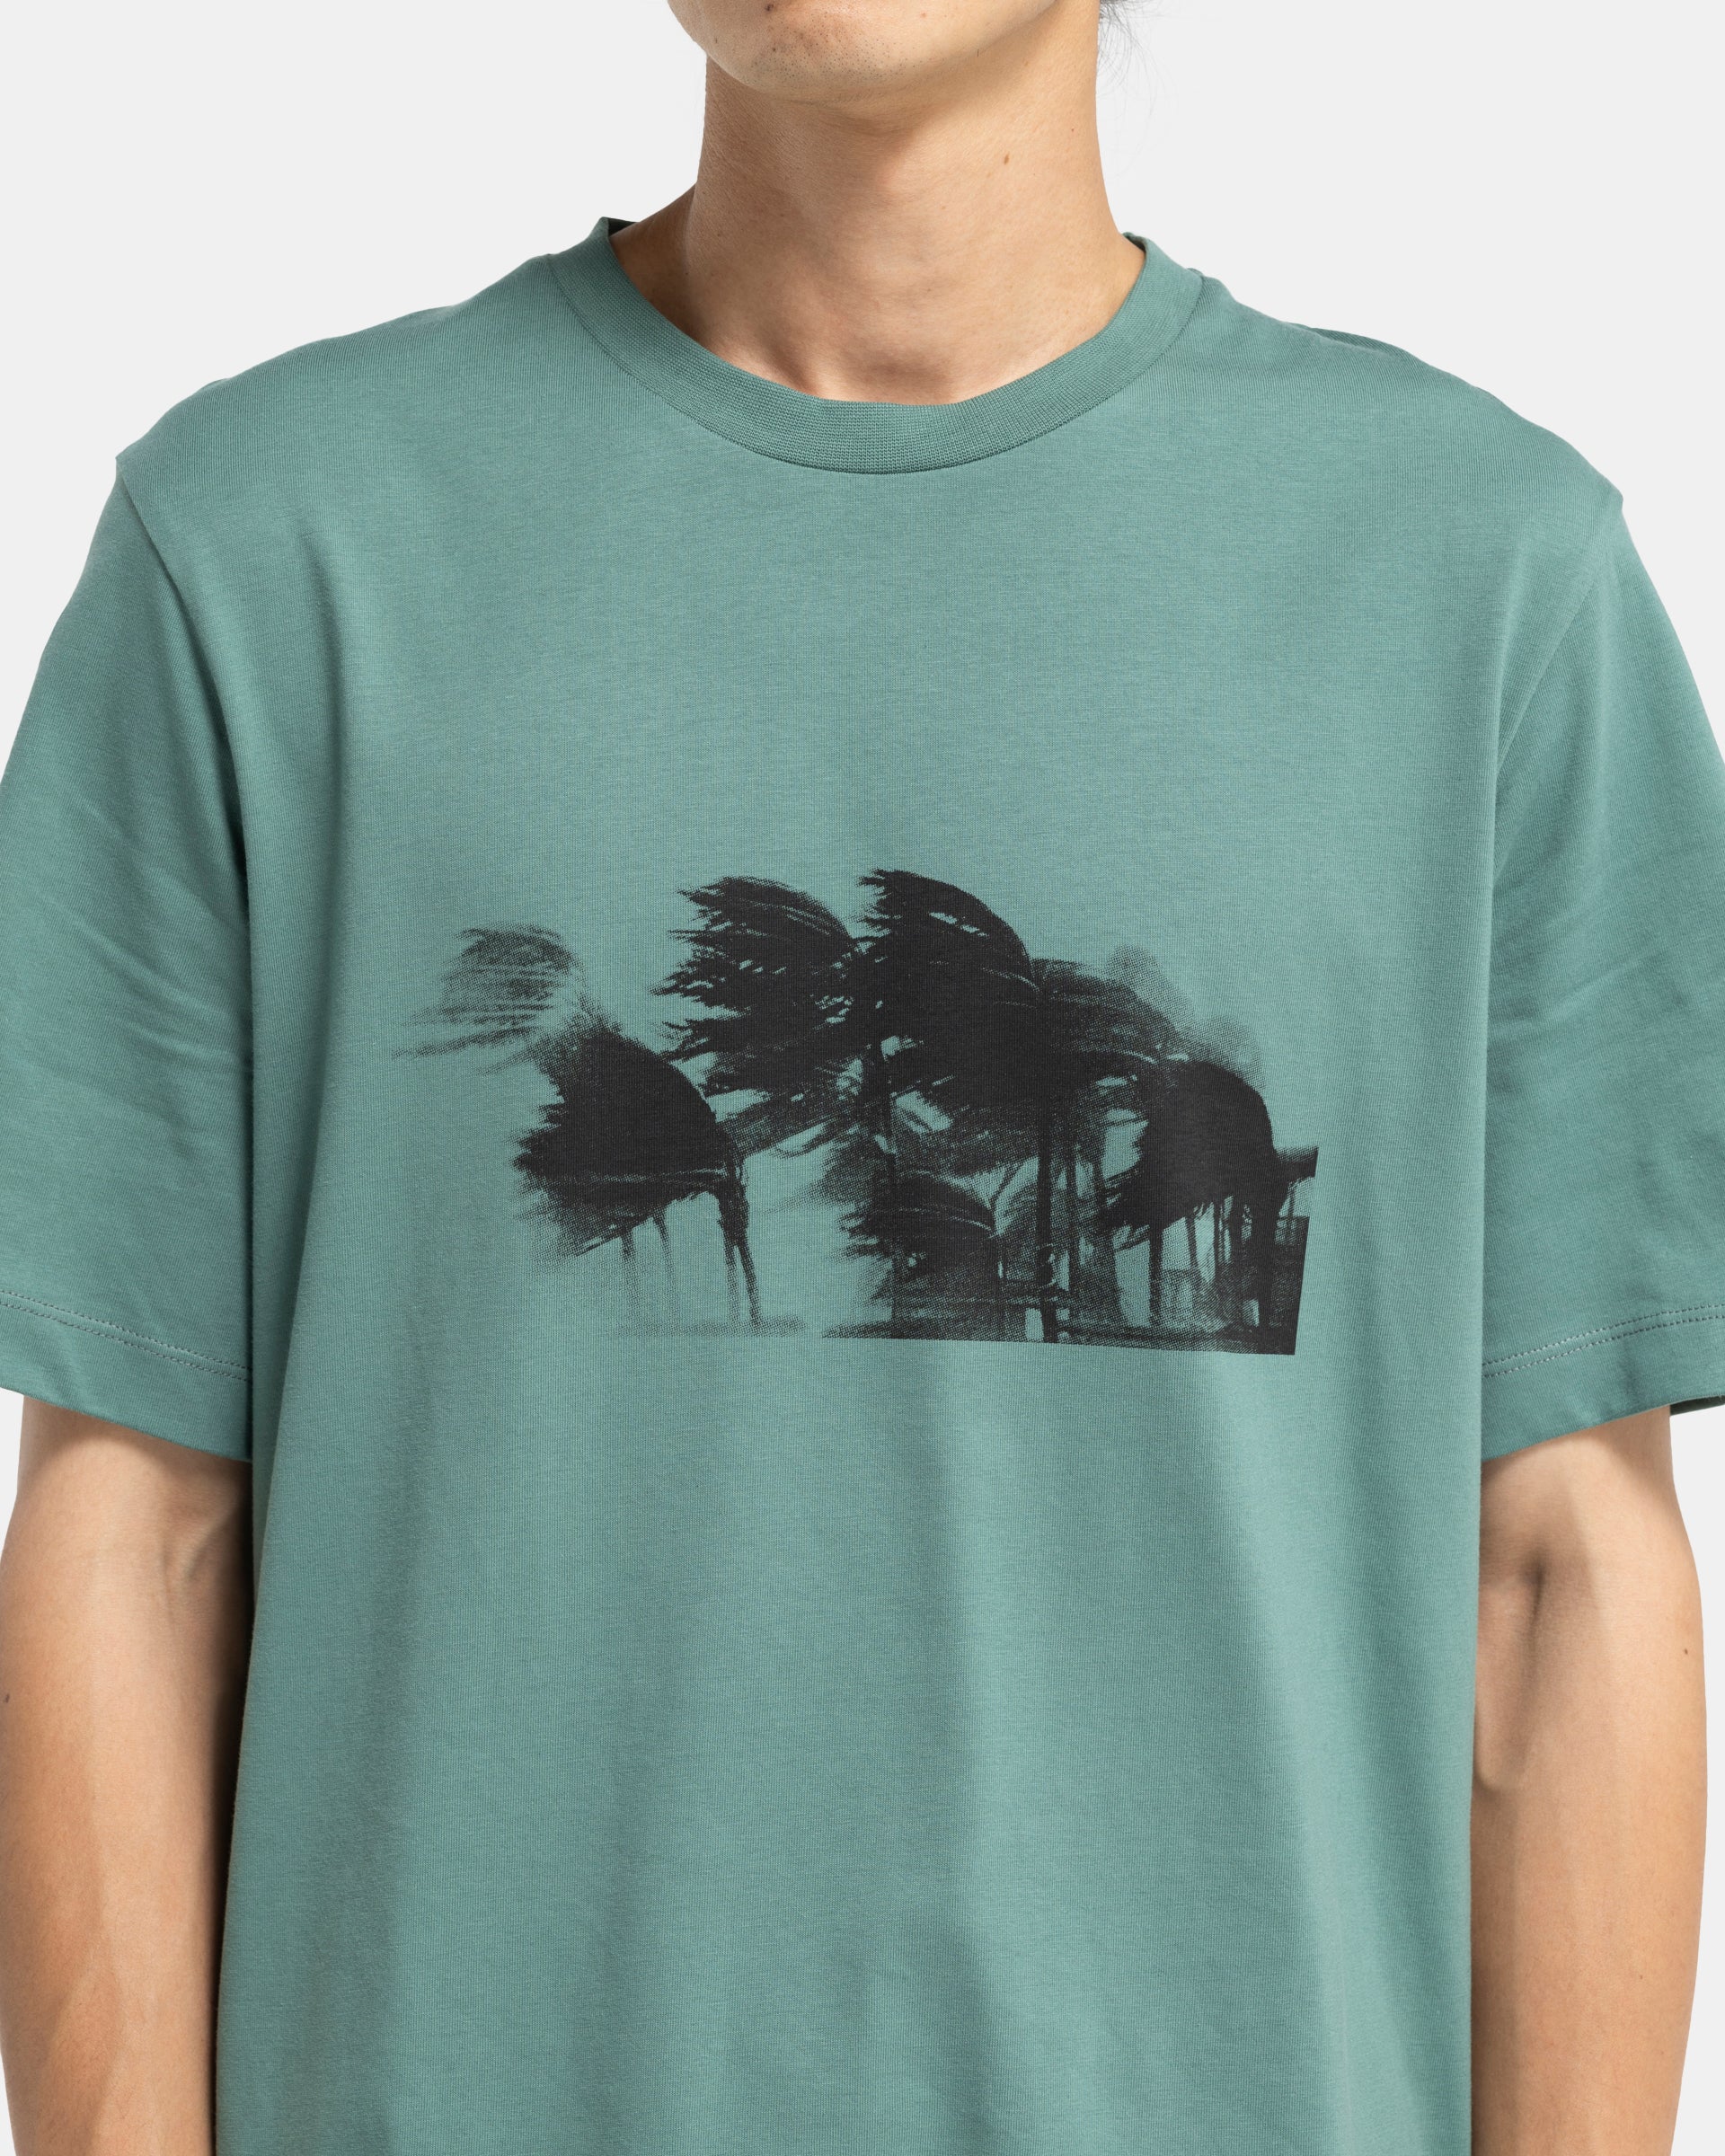 Palms T-Shirt in Pine